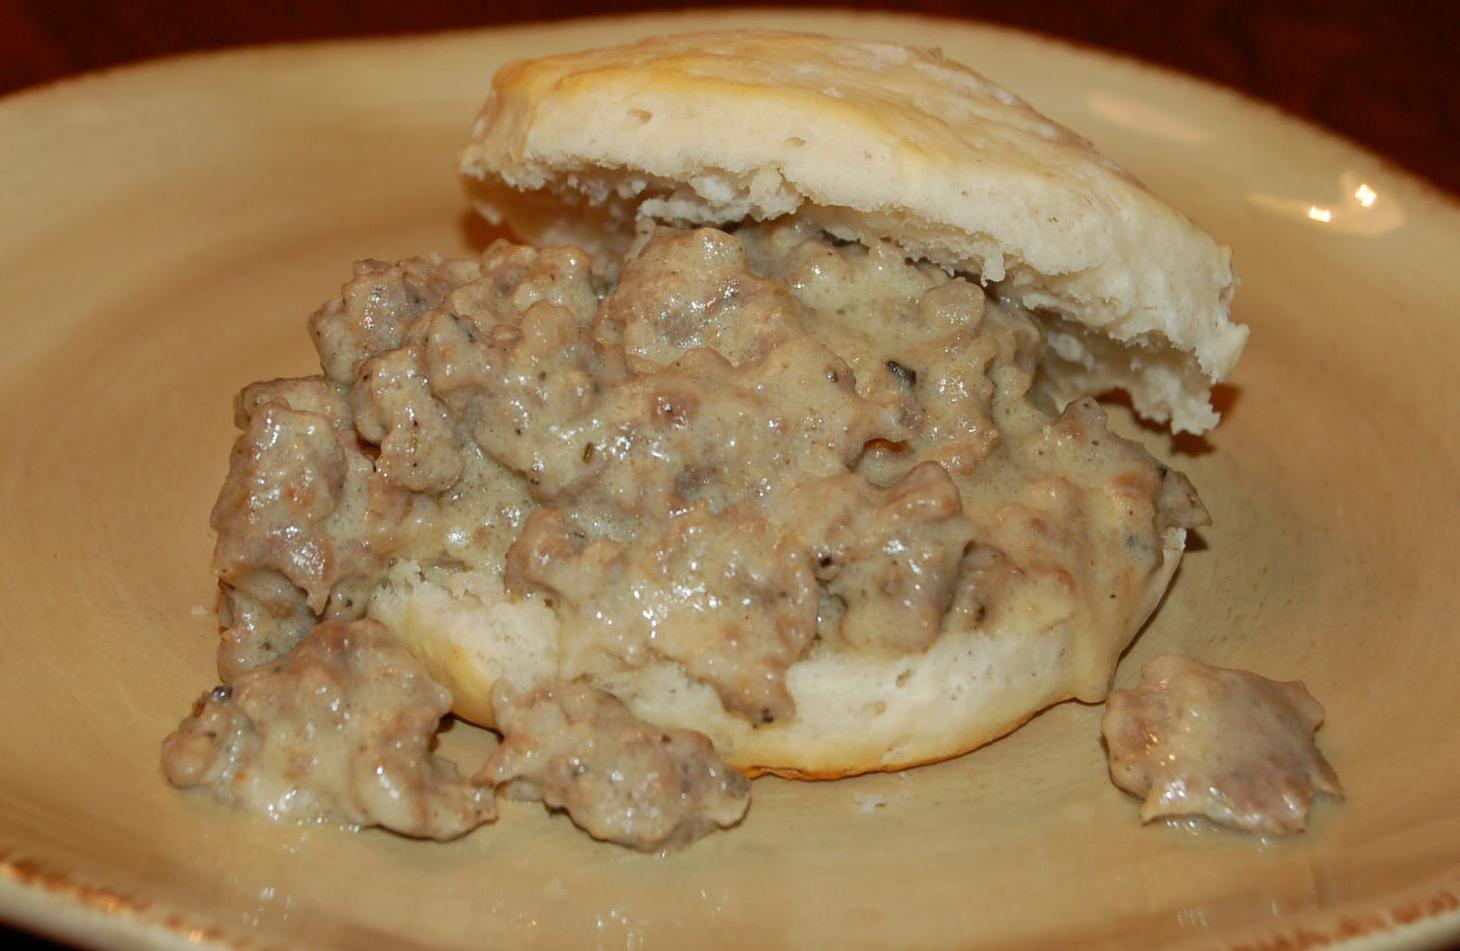  Indulge in this cozy breakfast with warm and hearty Brewed Coffee Sausage Gravy.